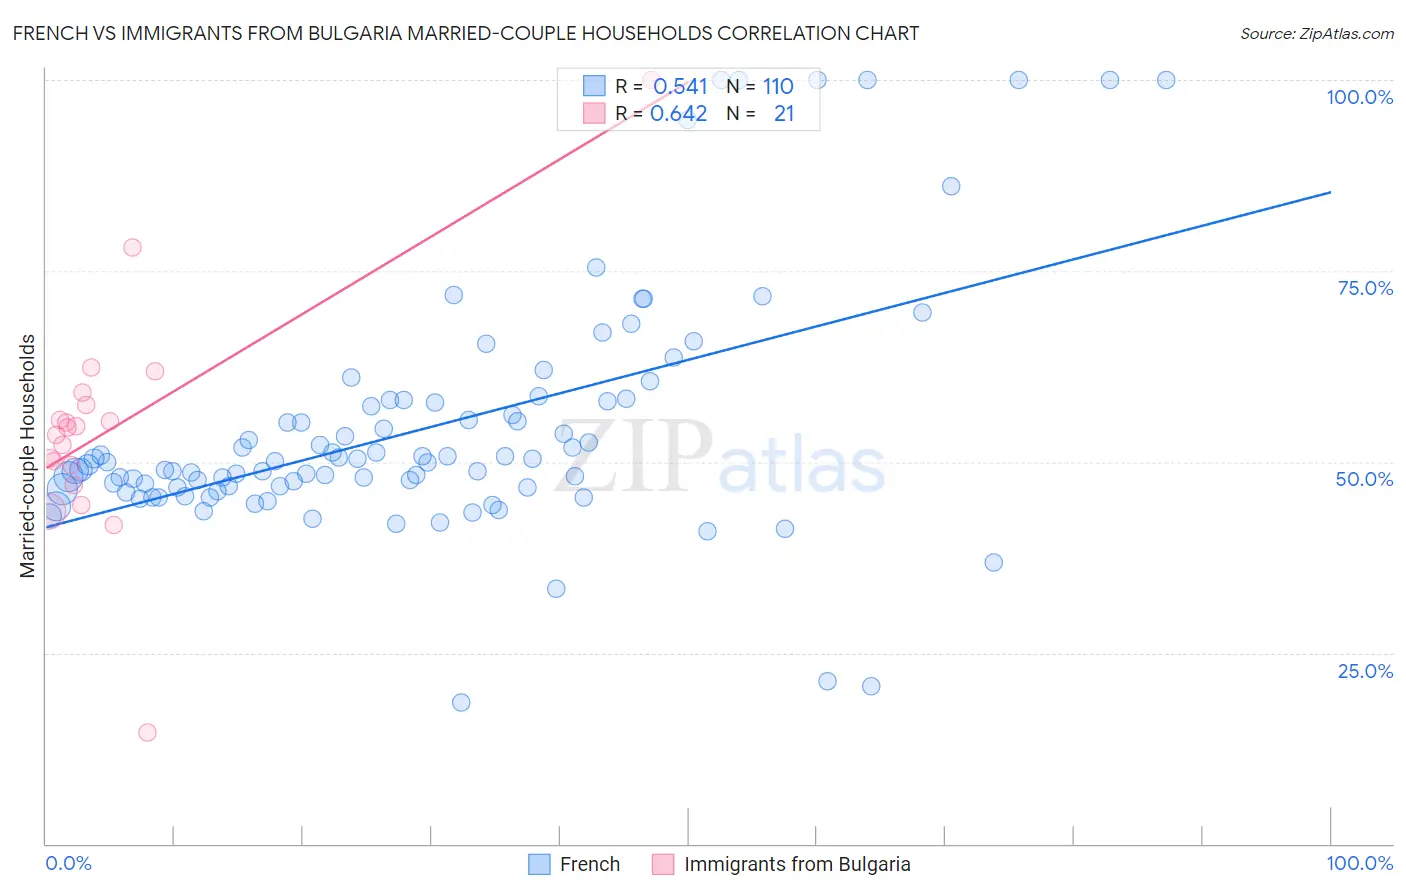 French vs Immigrants from Bulgaria Married-couple Households